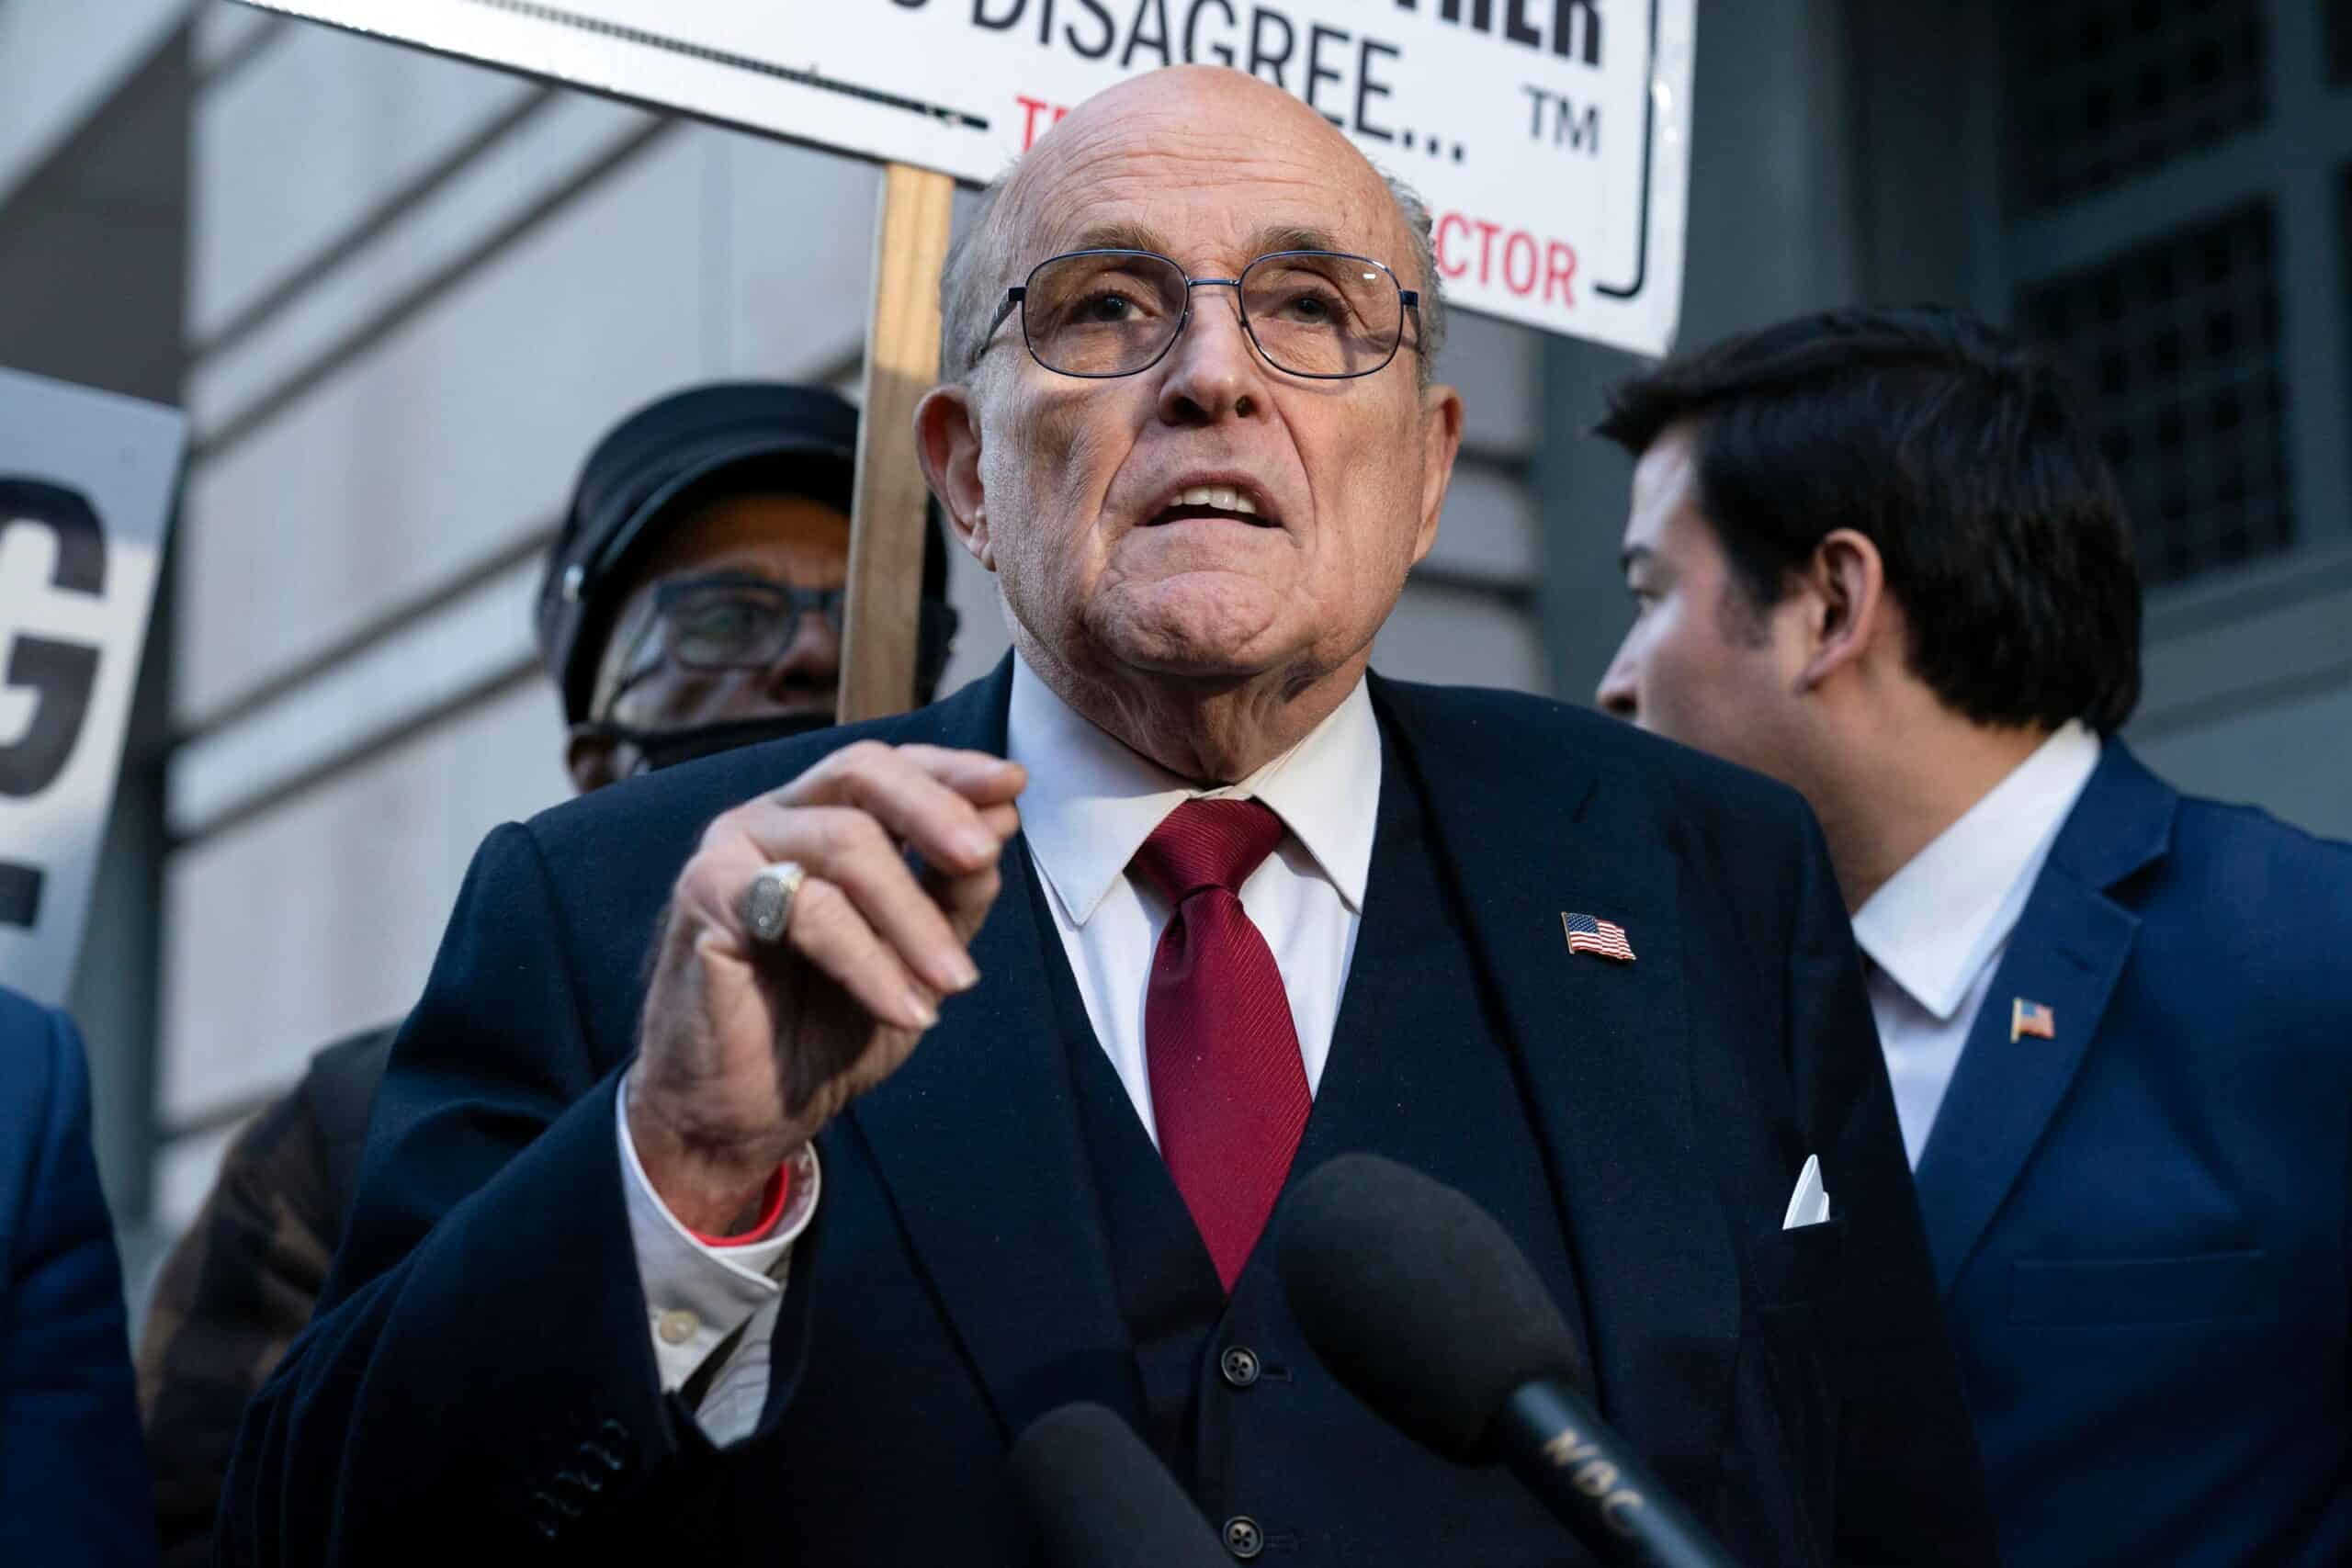 Rudy Giuliani files for bankruptcy after $148m defamation lawsuit